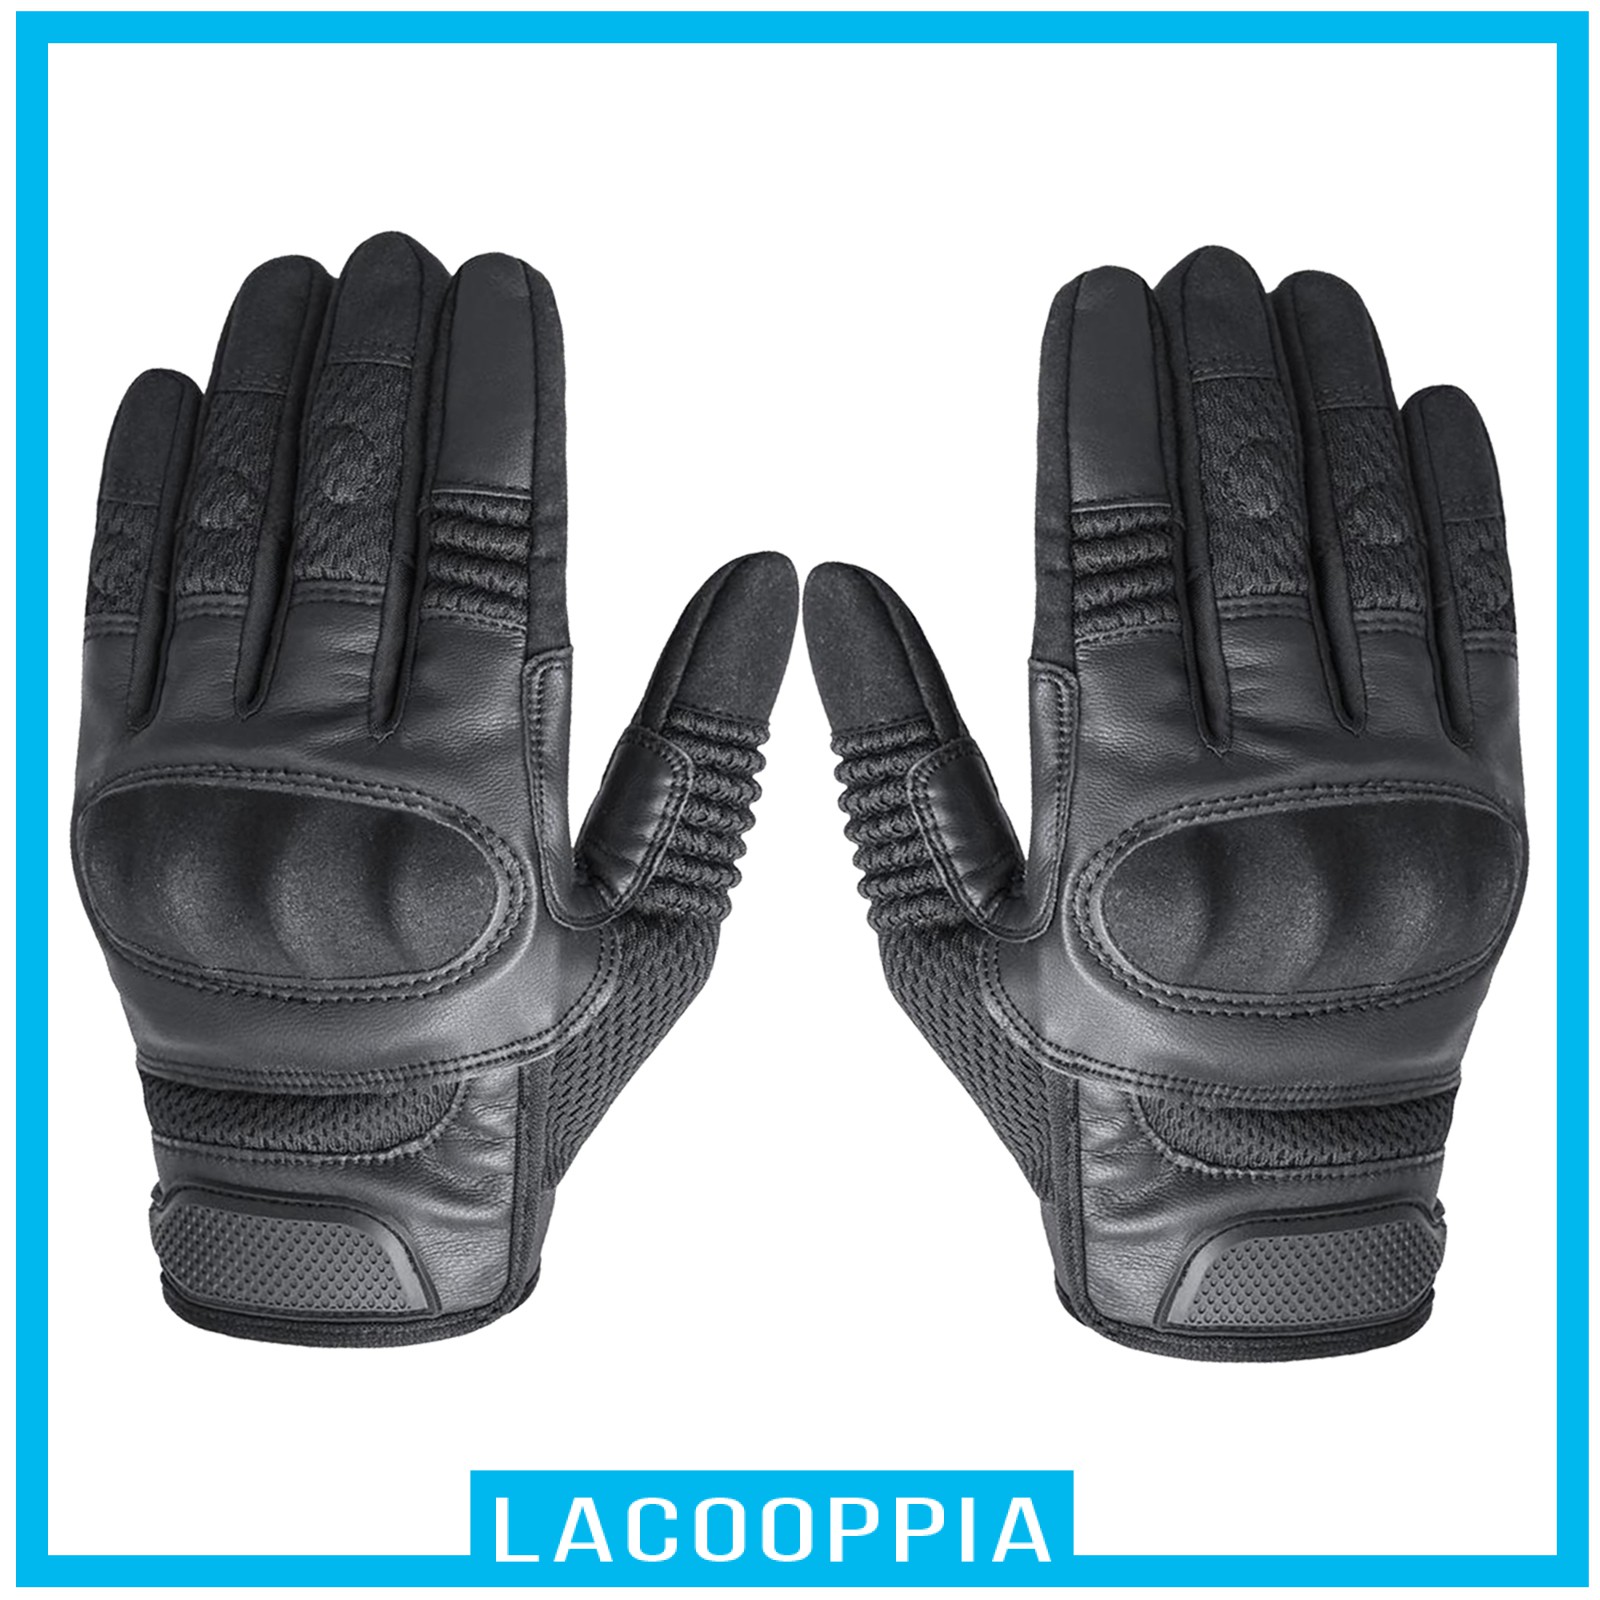 [LACOOPPIA] 2xWinter Thermal Ski Gloves Touchscreen Waterproof Snow Motorcycle Gloves Male